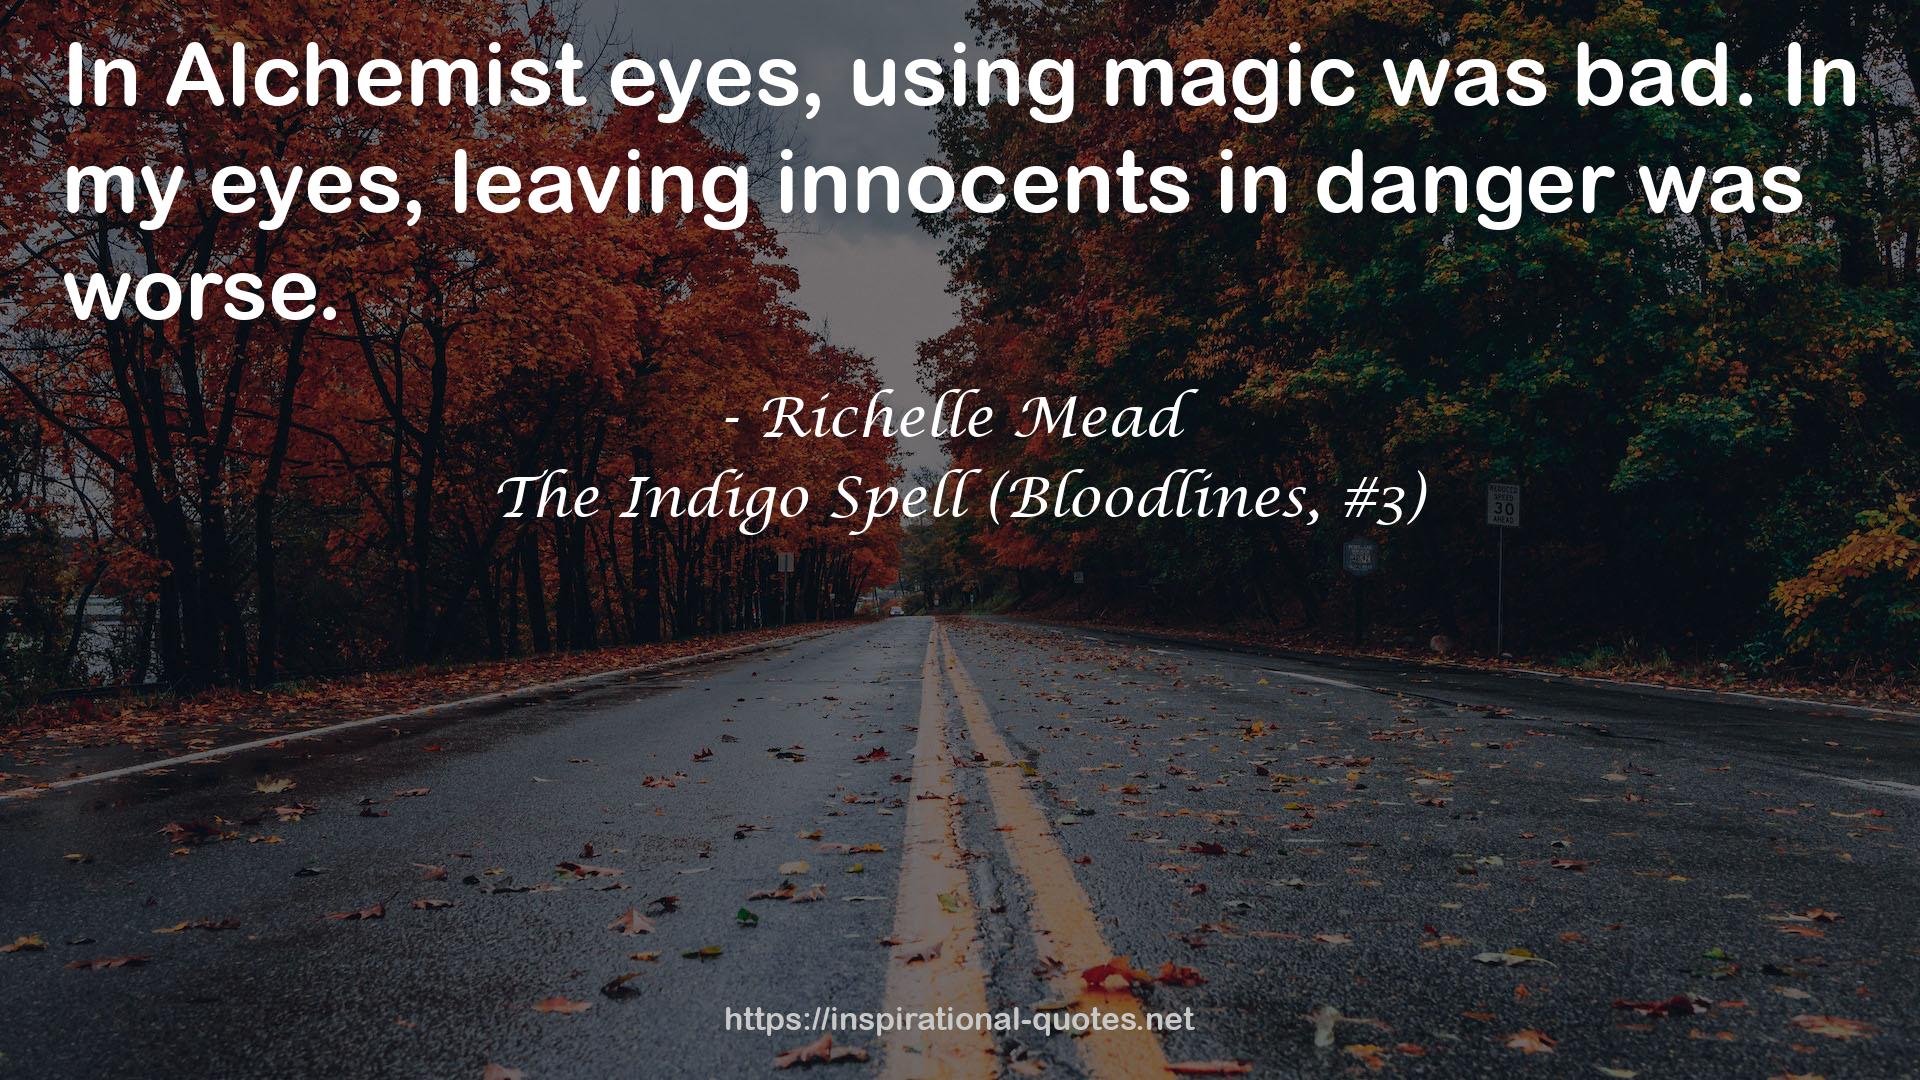 The Indigo Spell (Bloodlines, #3) QUOTES